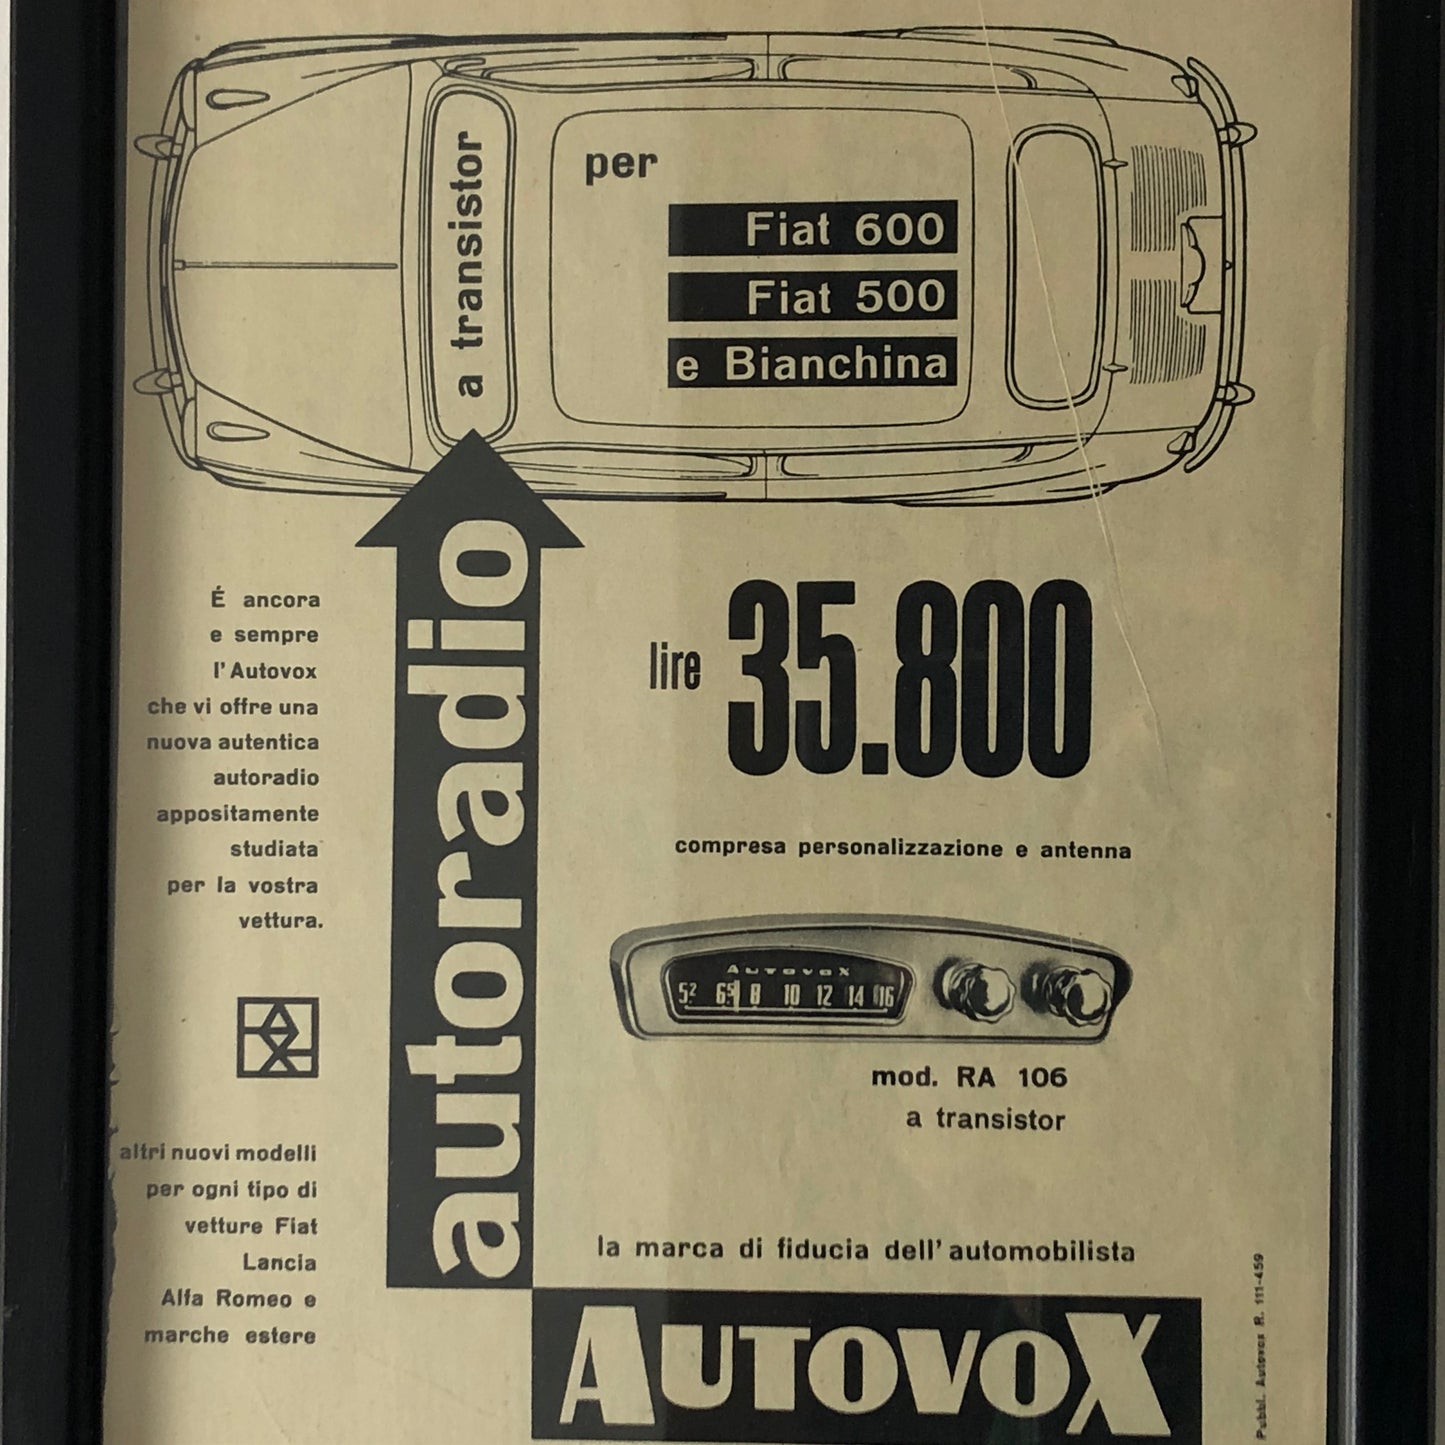 Autovox, 1959 Autovox Car Radio Advertising for Fiat 600 Fiat 500 and Bianchina